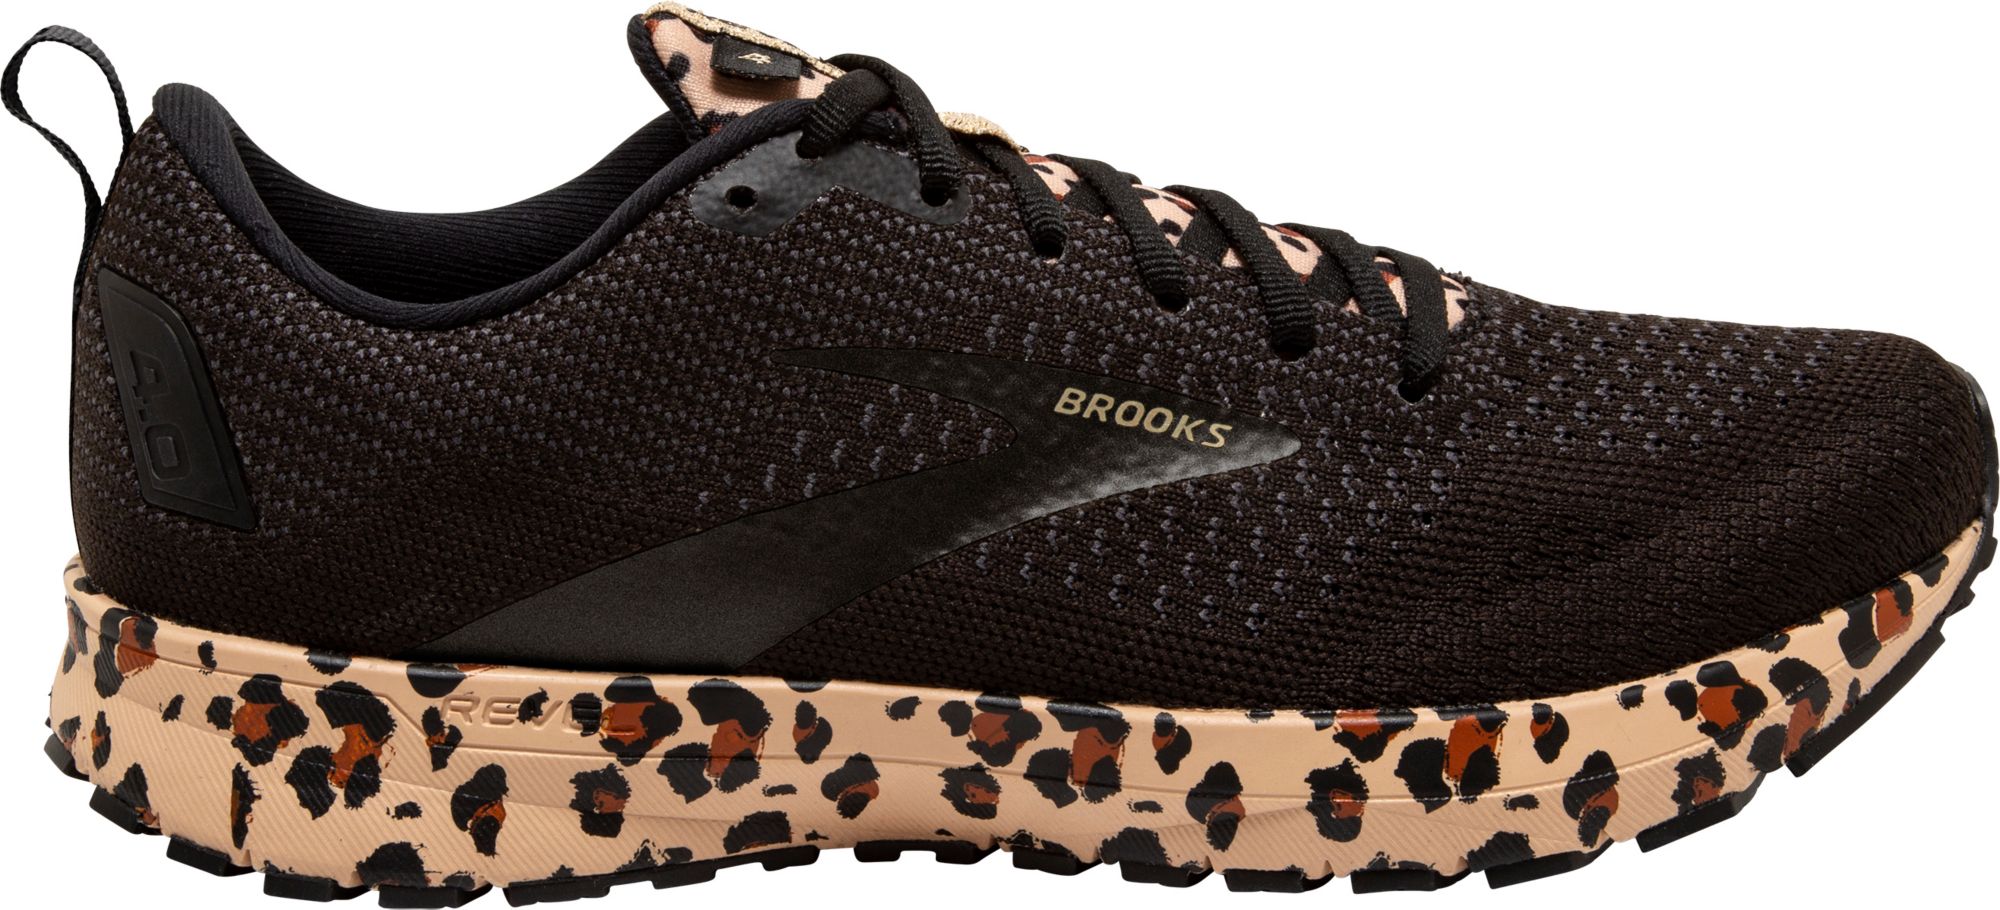 brooks shoes womens brown